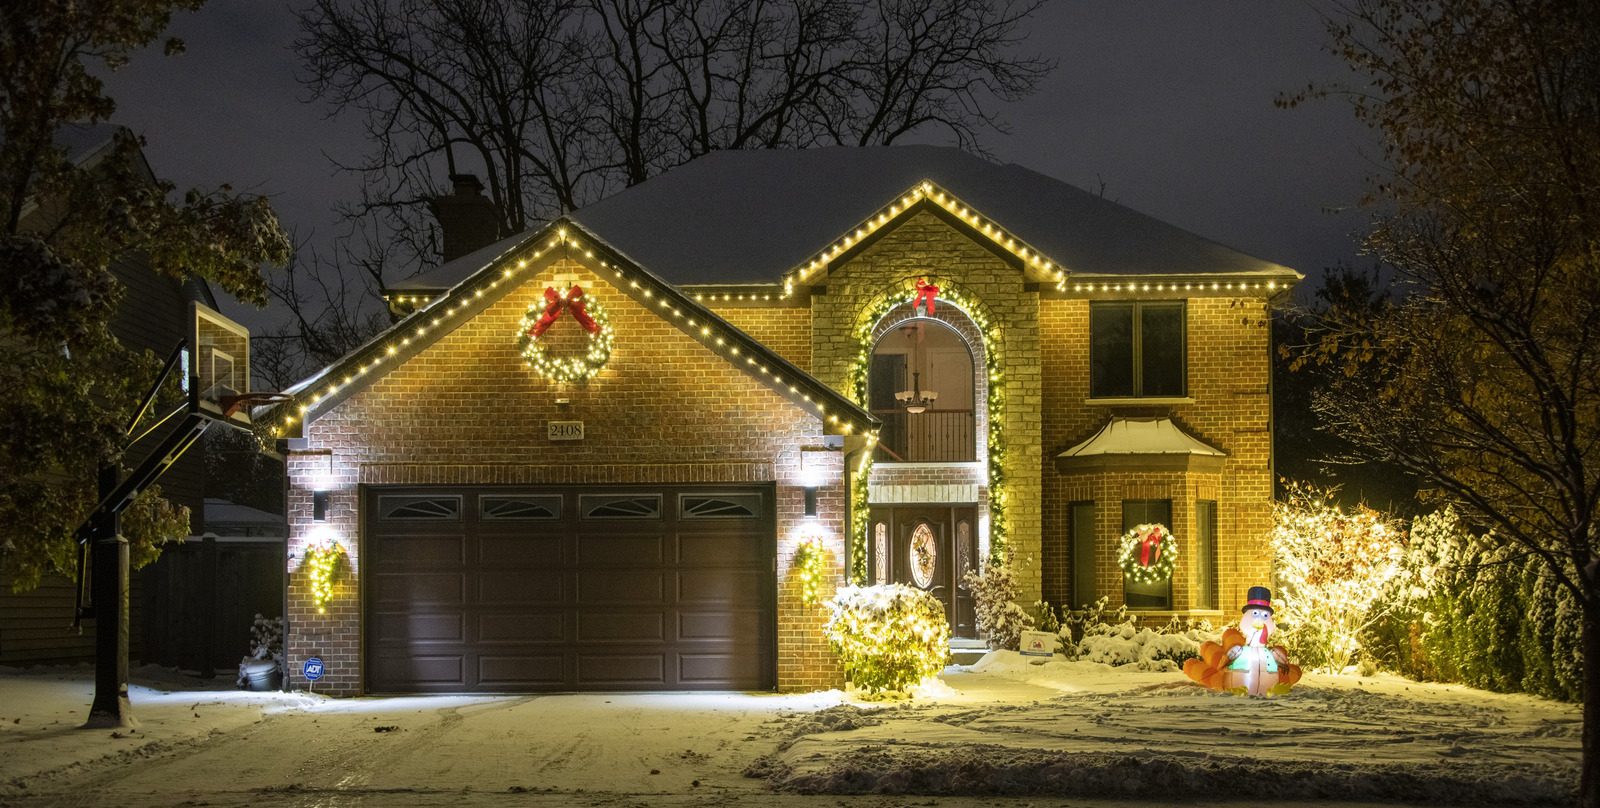 Holiday Lights Installation in Chicago, IL | Light Up Your Holidays